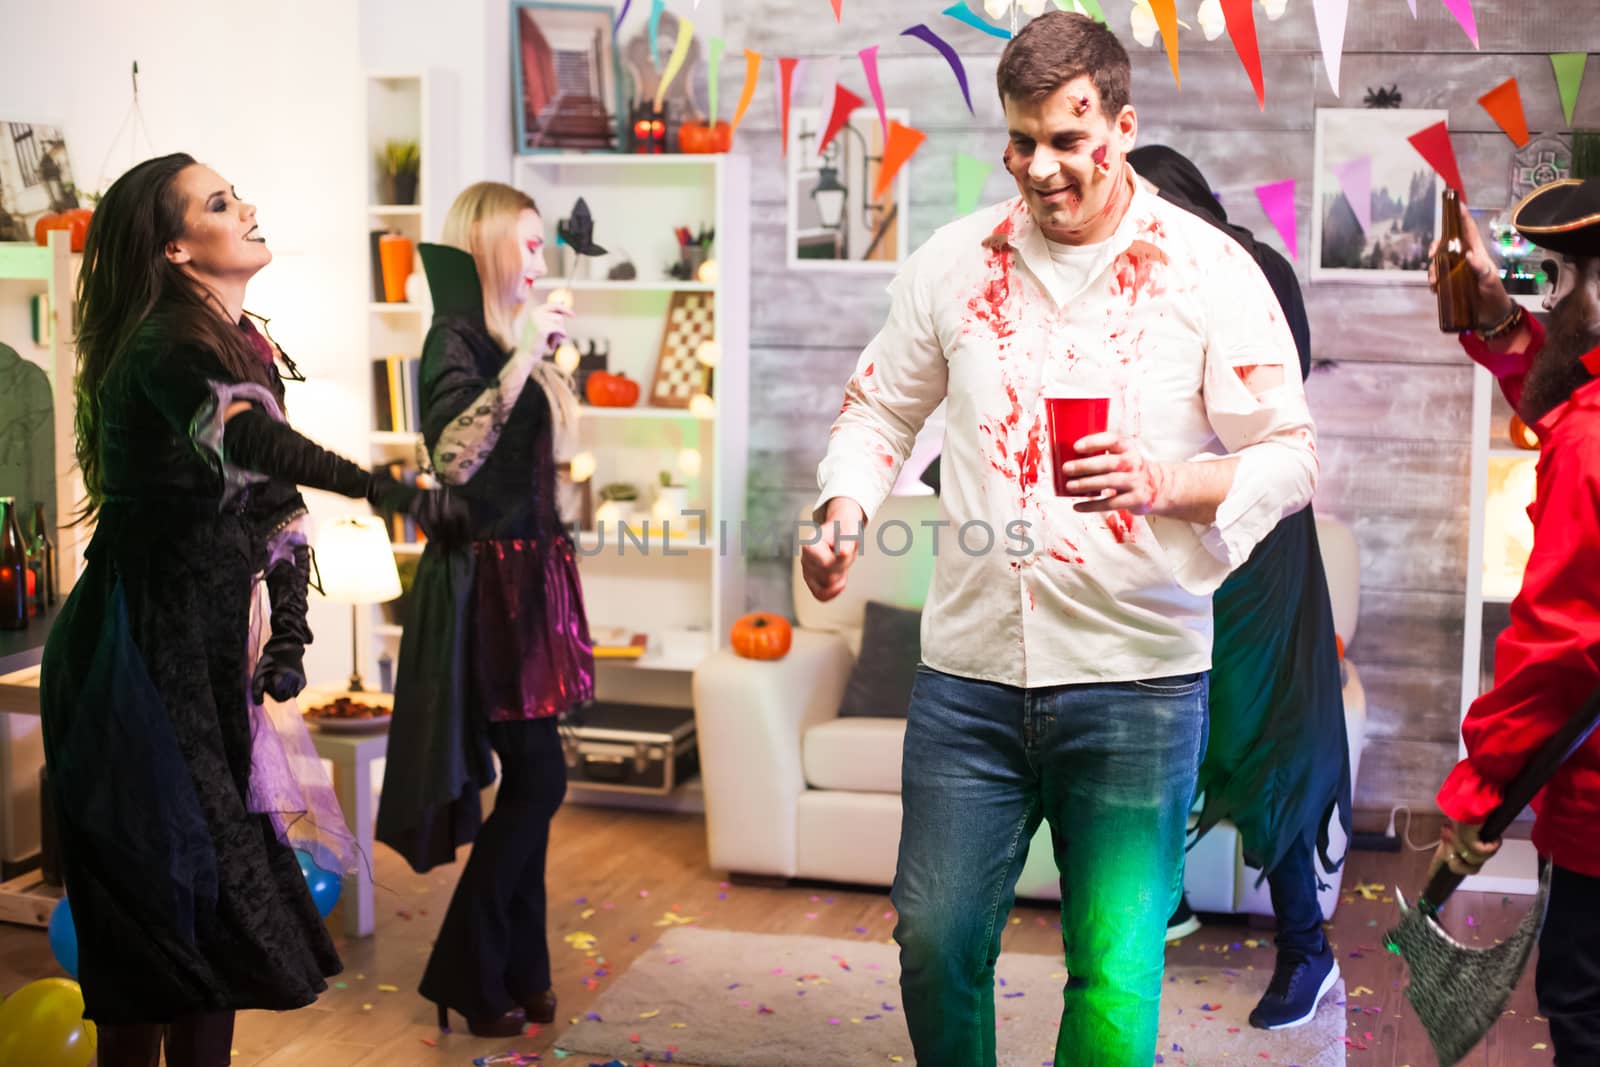 Man dressed up like a zombie drinking beer while celebrating halloween with his friends.